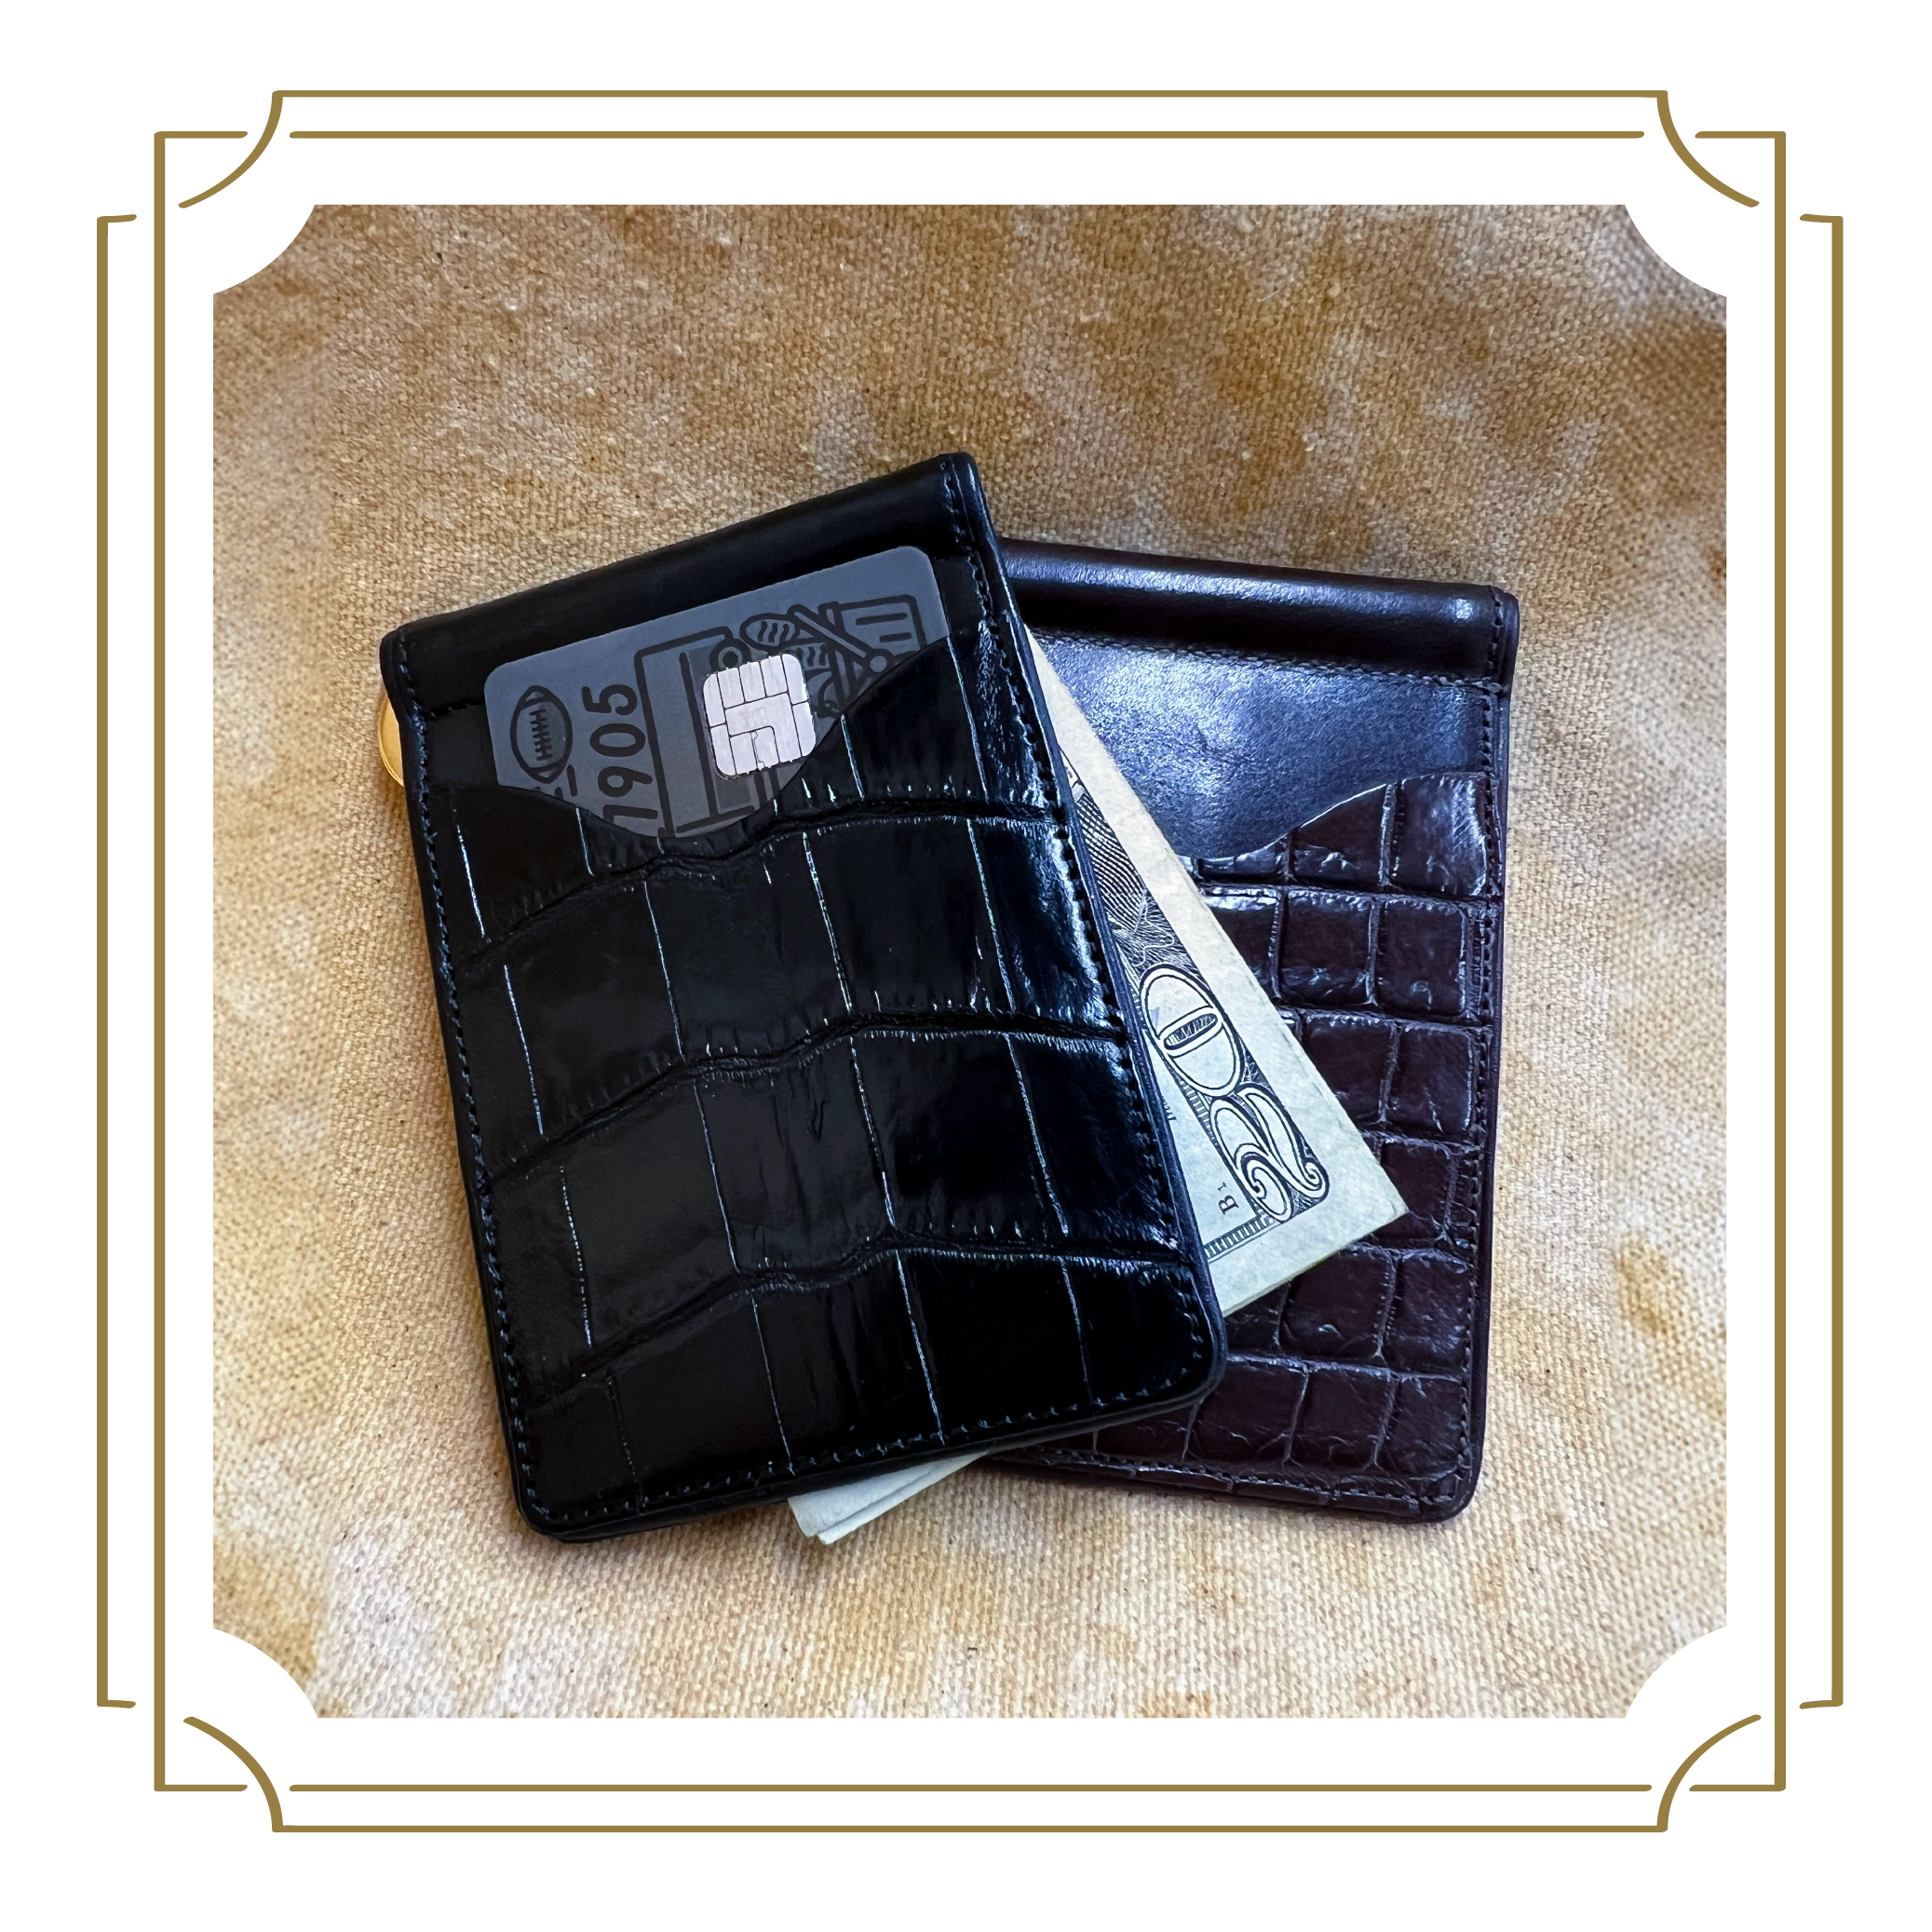 Two leather wallets, one black and one dark brown, laying on a light brown textured surface.